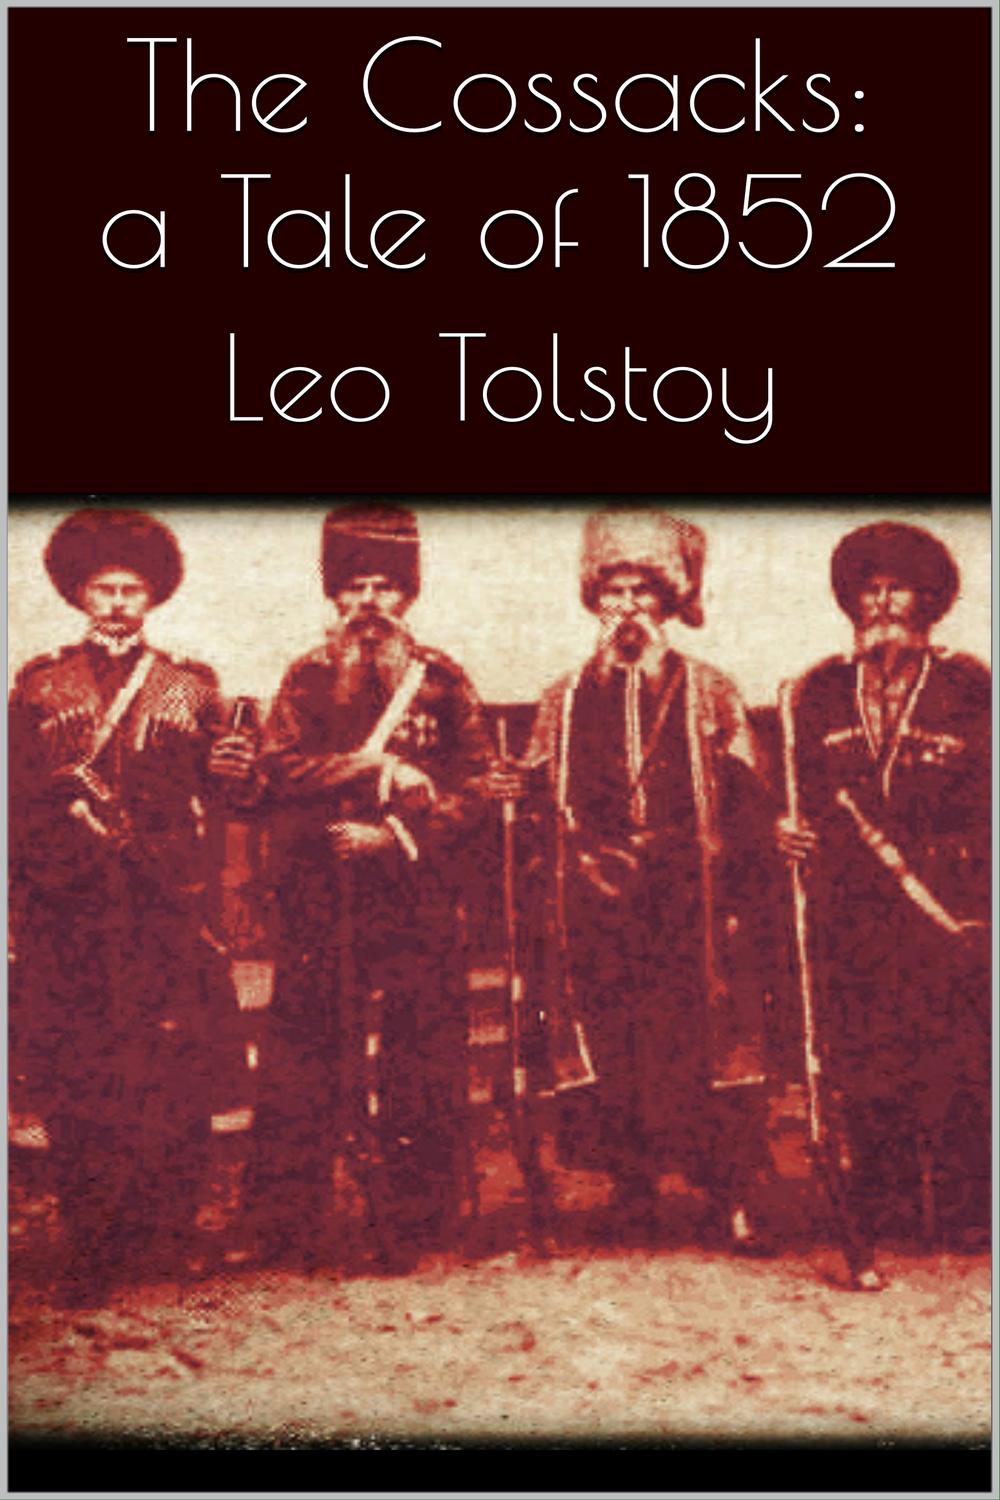 The Cossacks: A Tale of 1852 - Leo Tolstoy